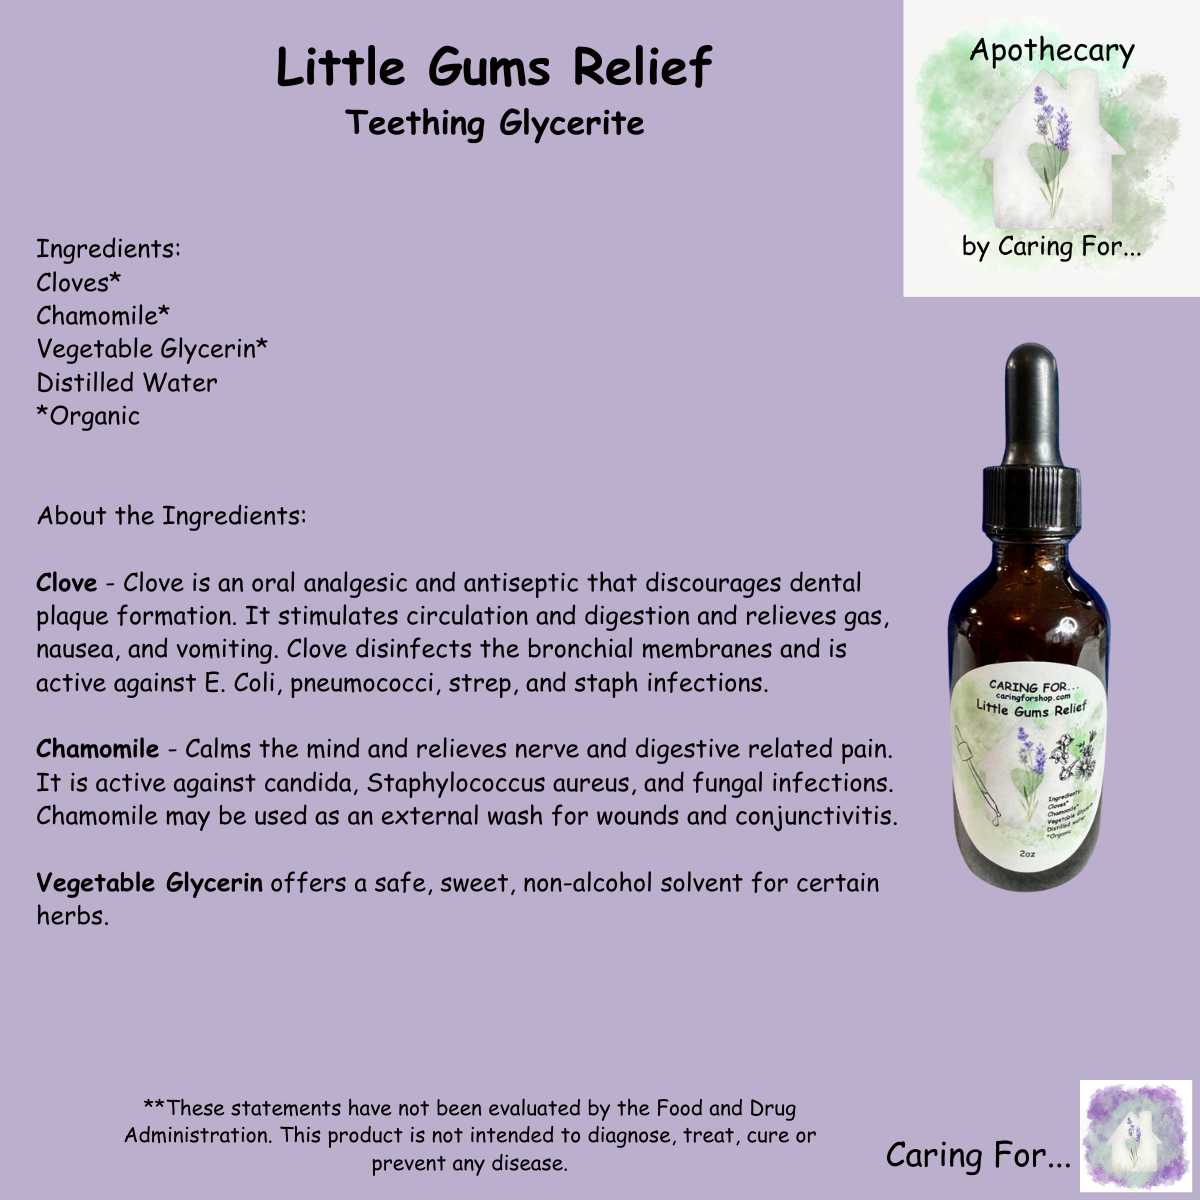 Little Gums Relief | 2oz | Teething Glycerite | Teething Relief | Oral Pain Relief | Apothecary by Caring For... | M/B/T